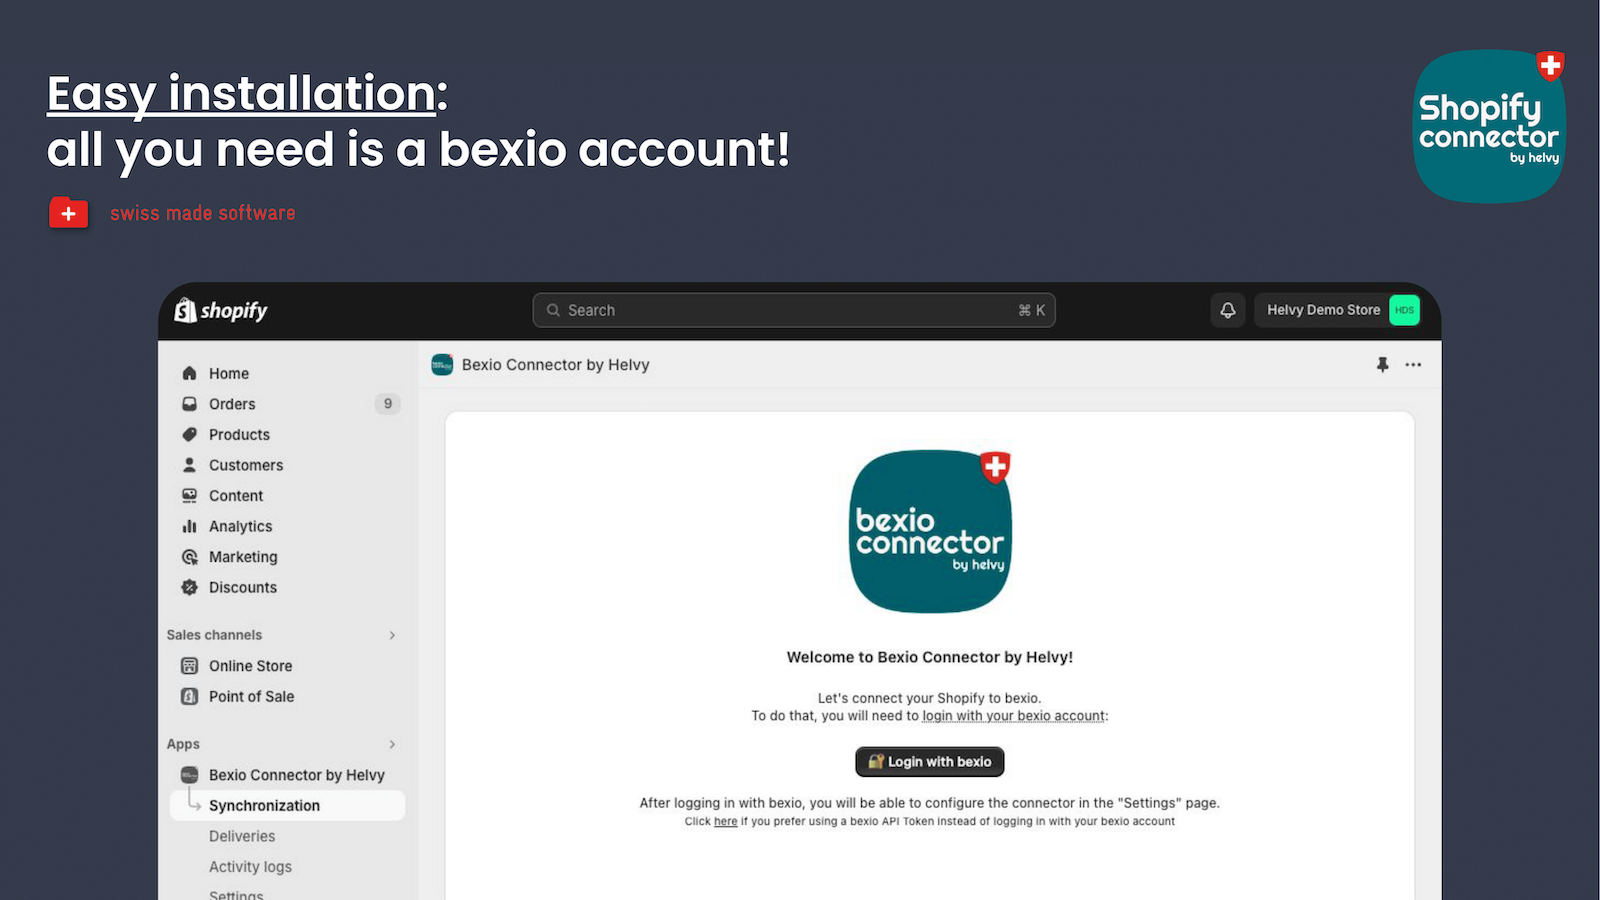 Easy installation: all you need is a bexio account!